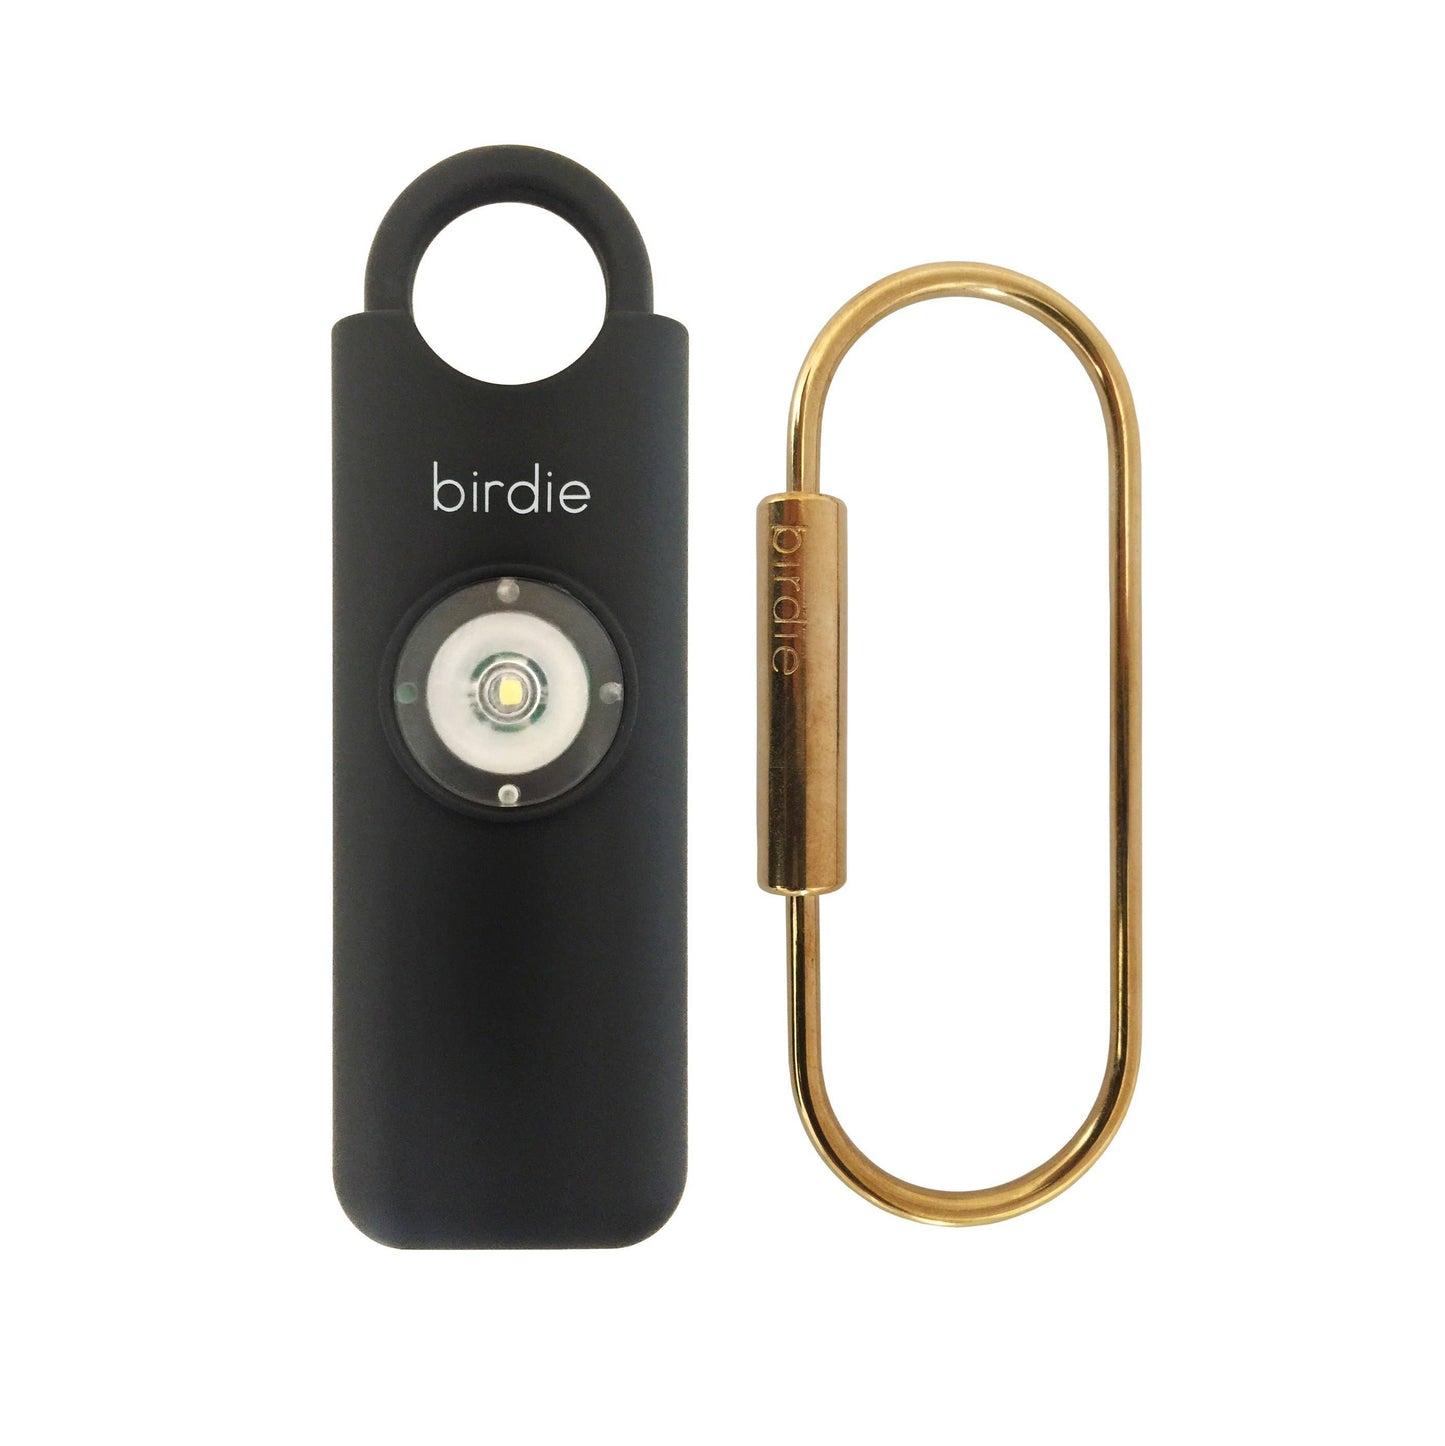 She's Birdie - She's Birdie Personal Safety Alarm - Charcoal